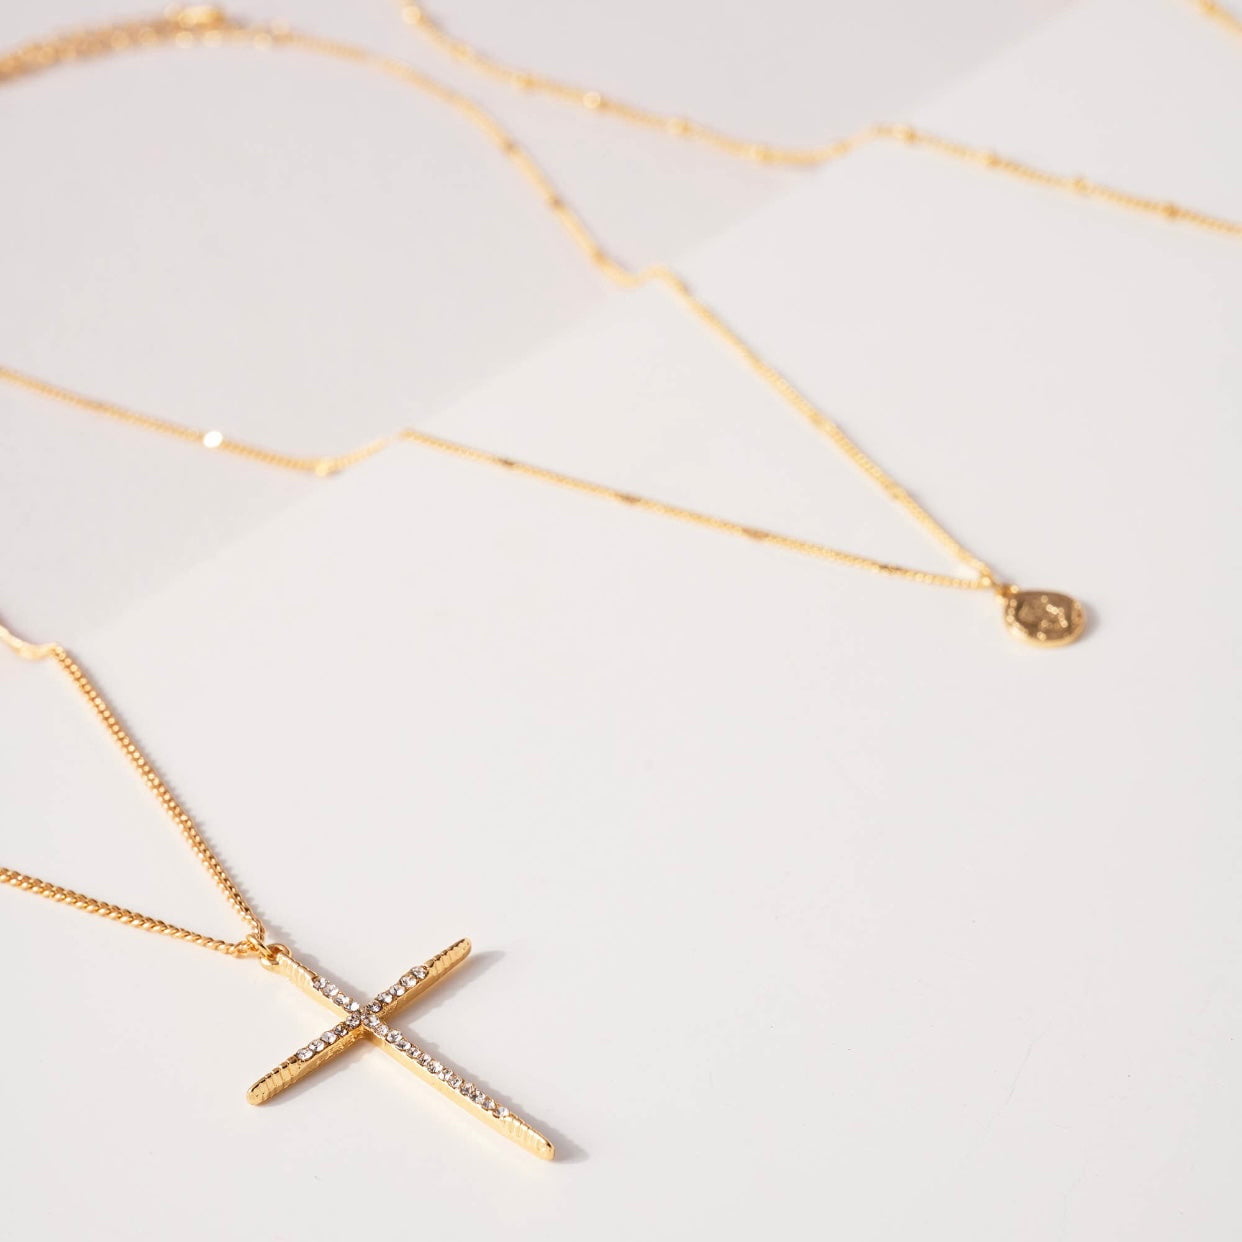 18k Gold Plated Layered Necklaces w/ Cross & Coin Charms